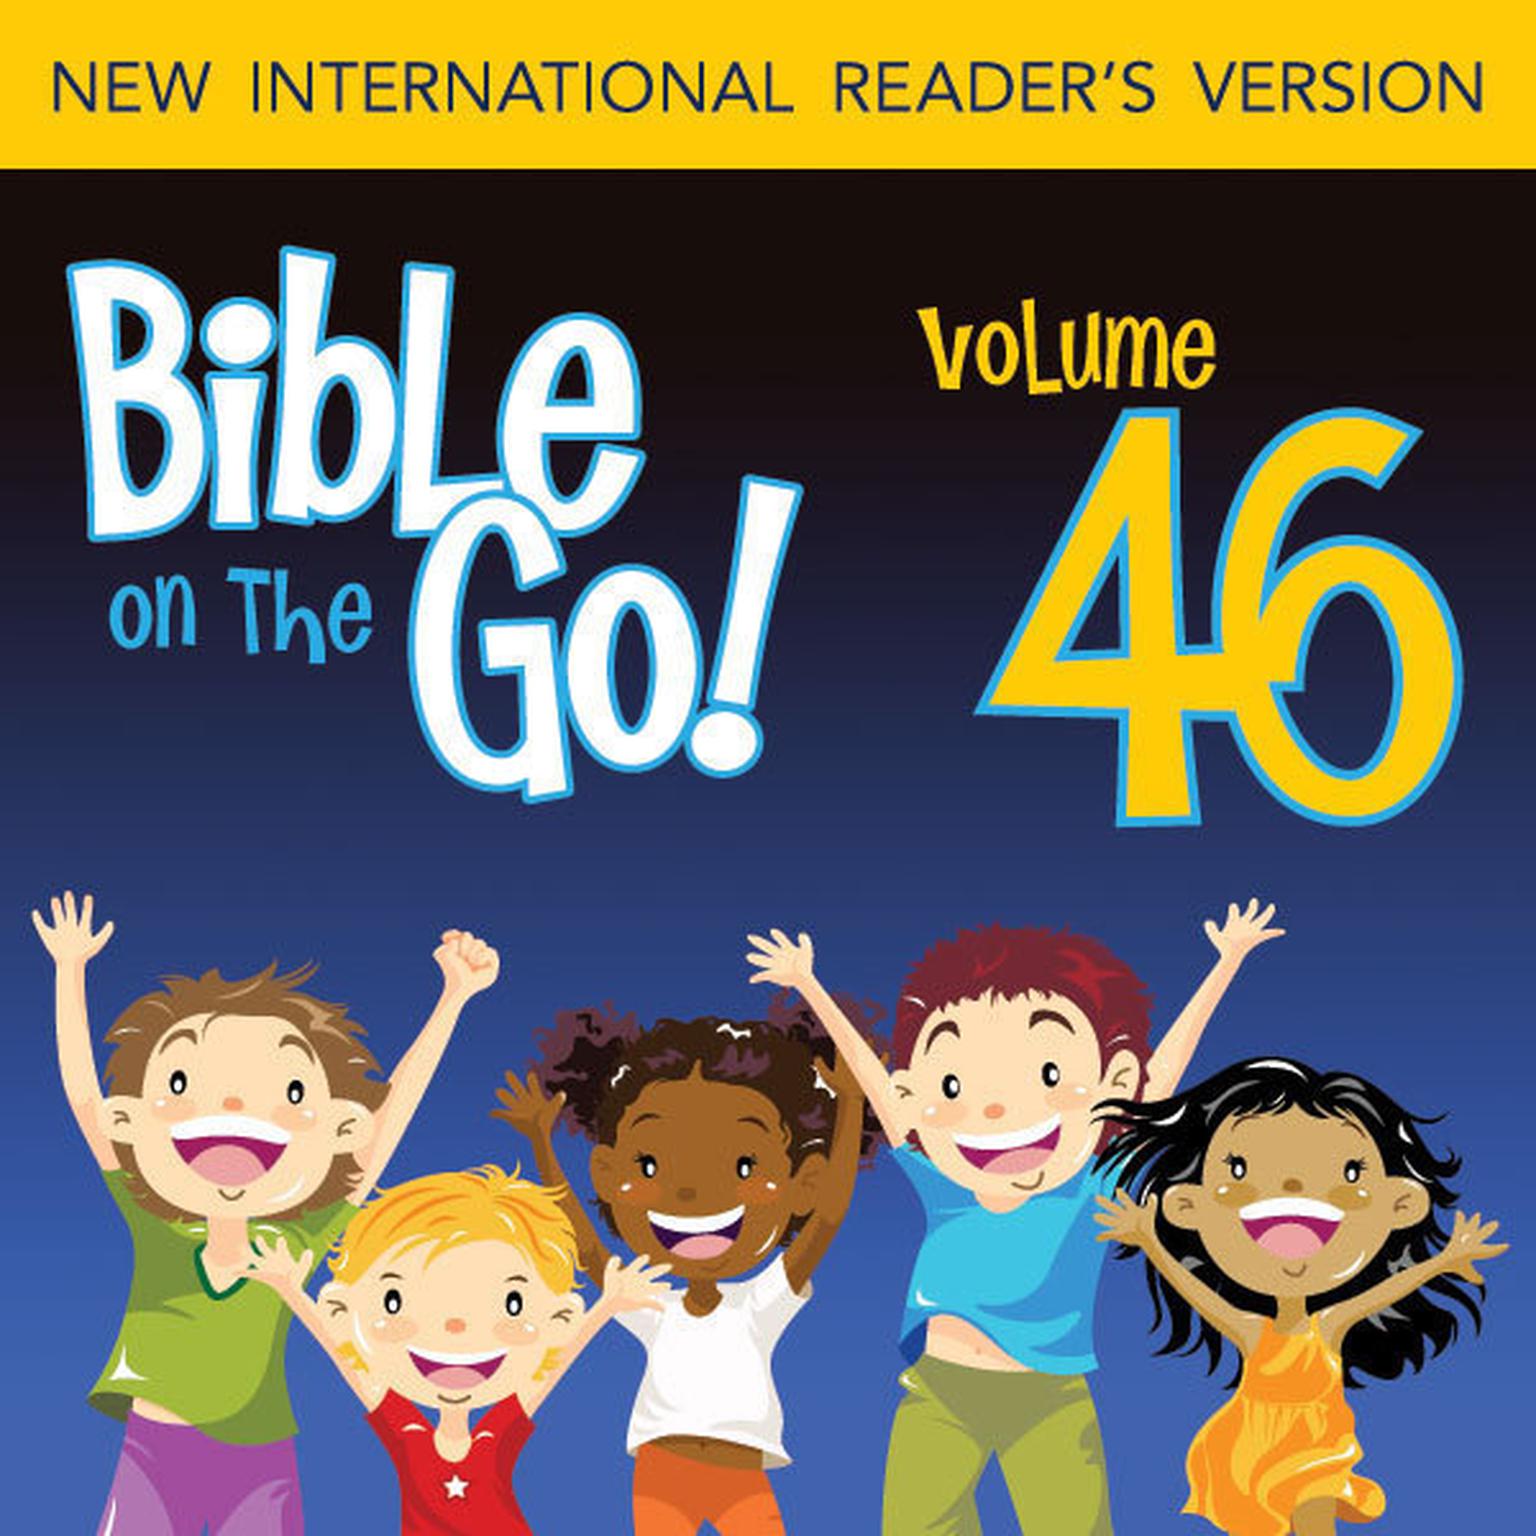 Bible on the Go Audio Bible - New International Readers Version, NIrV: Vol. 46 Pauls Letters to the Corinthians and Galatians (1 Corinthians 12, 13; 2 Corinthians 2, 4, 5; Galatians 5): Paul’s Letters to the Corinthians and Galatians (1 Corinthians 12, 13; 2 Corinthians 2, 4, 5; Galatians 5) Audiobook, by Zondervan